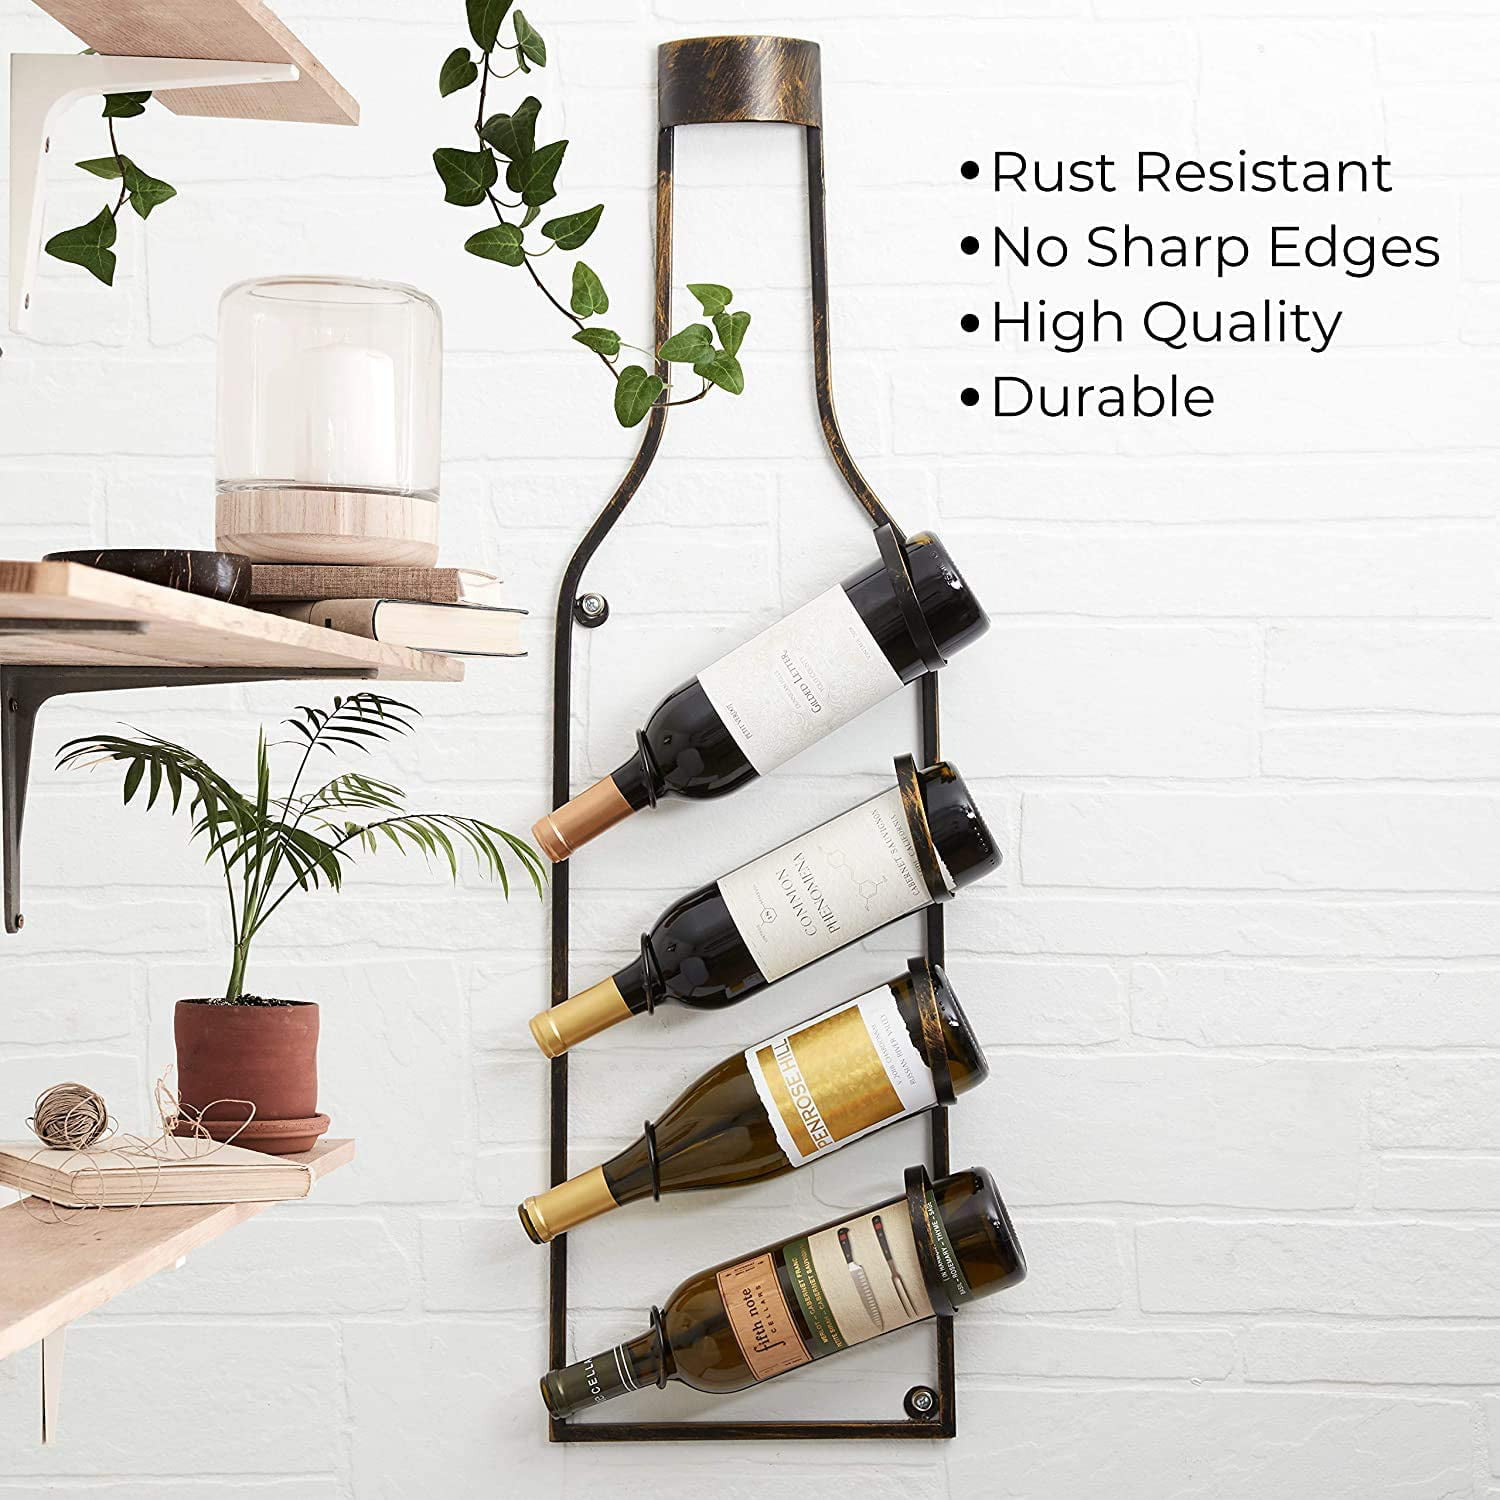 Golden Carriage Iron Euro Art Centerpiece Grape Red Wine Bottle Rack Decor Shelf Stemless Holder Leaning Simple Display Stand Unusual Organizer Unique Stylish Storage Metal Personalized Antique